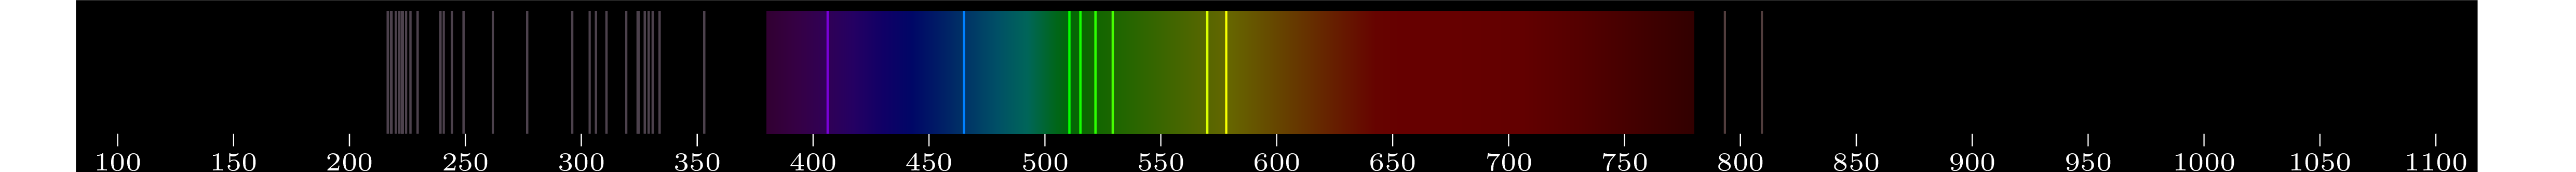 emmision spectra of element Cu